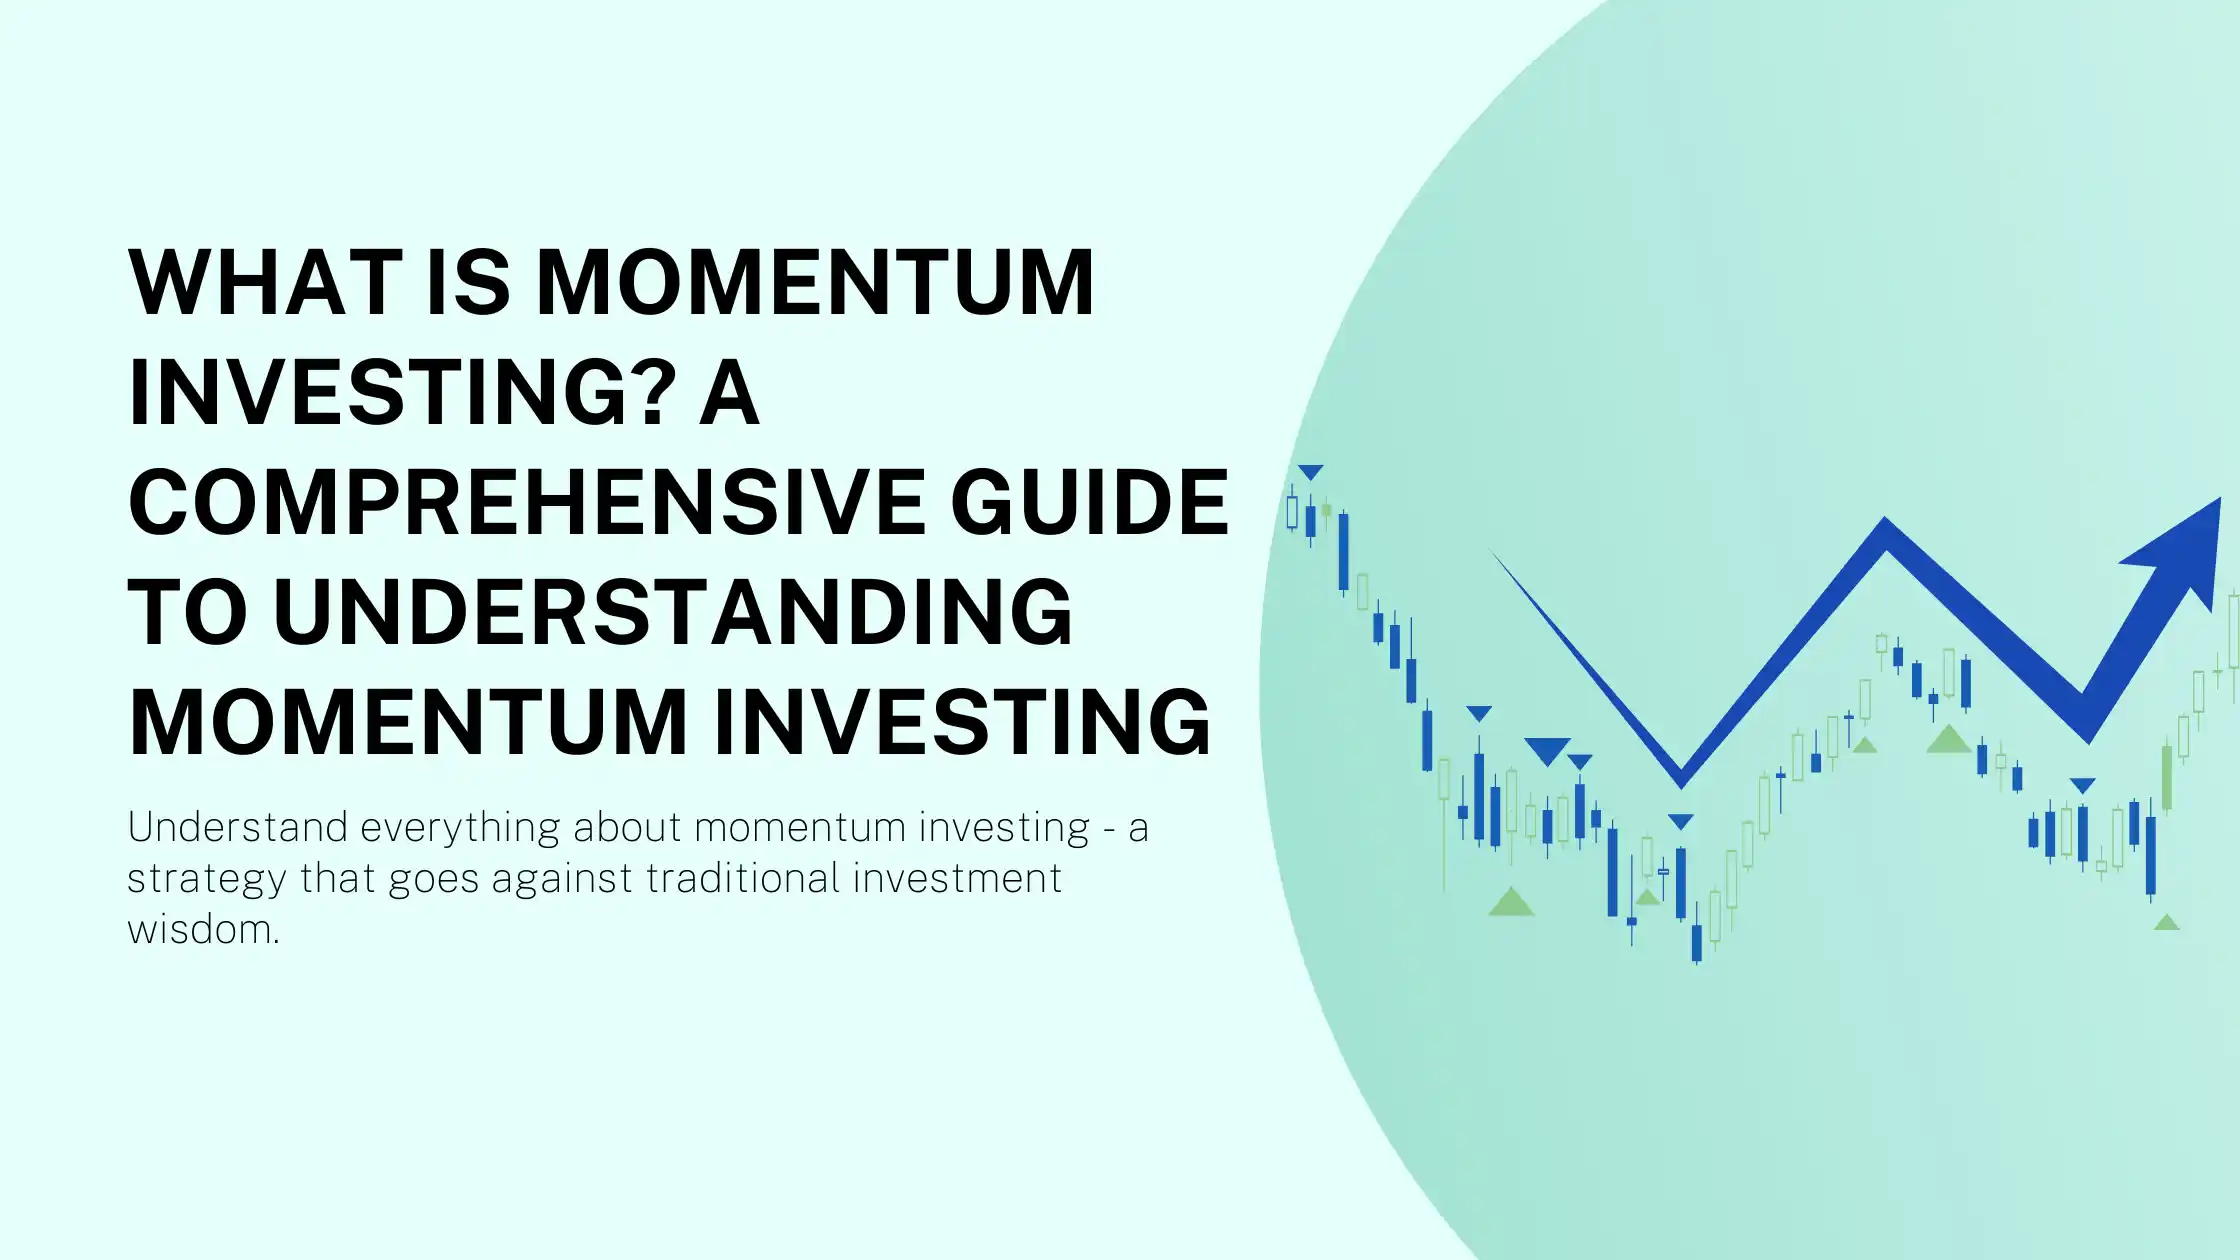 What is Momentum Investing? A Comprehensive Guide to Understanding Momentum Investing